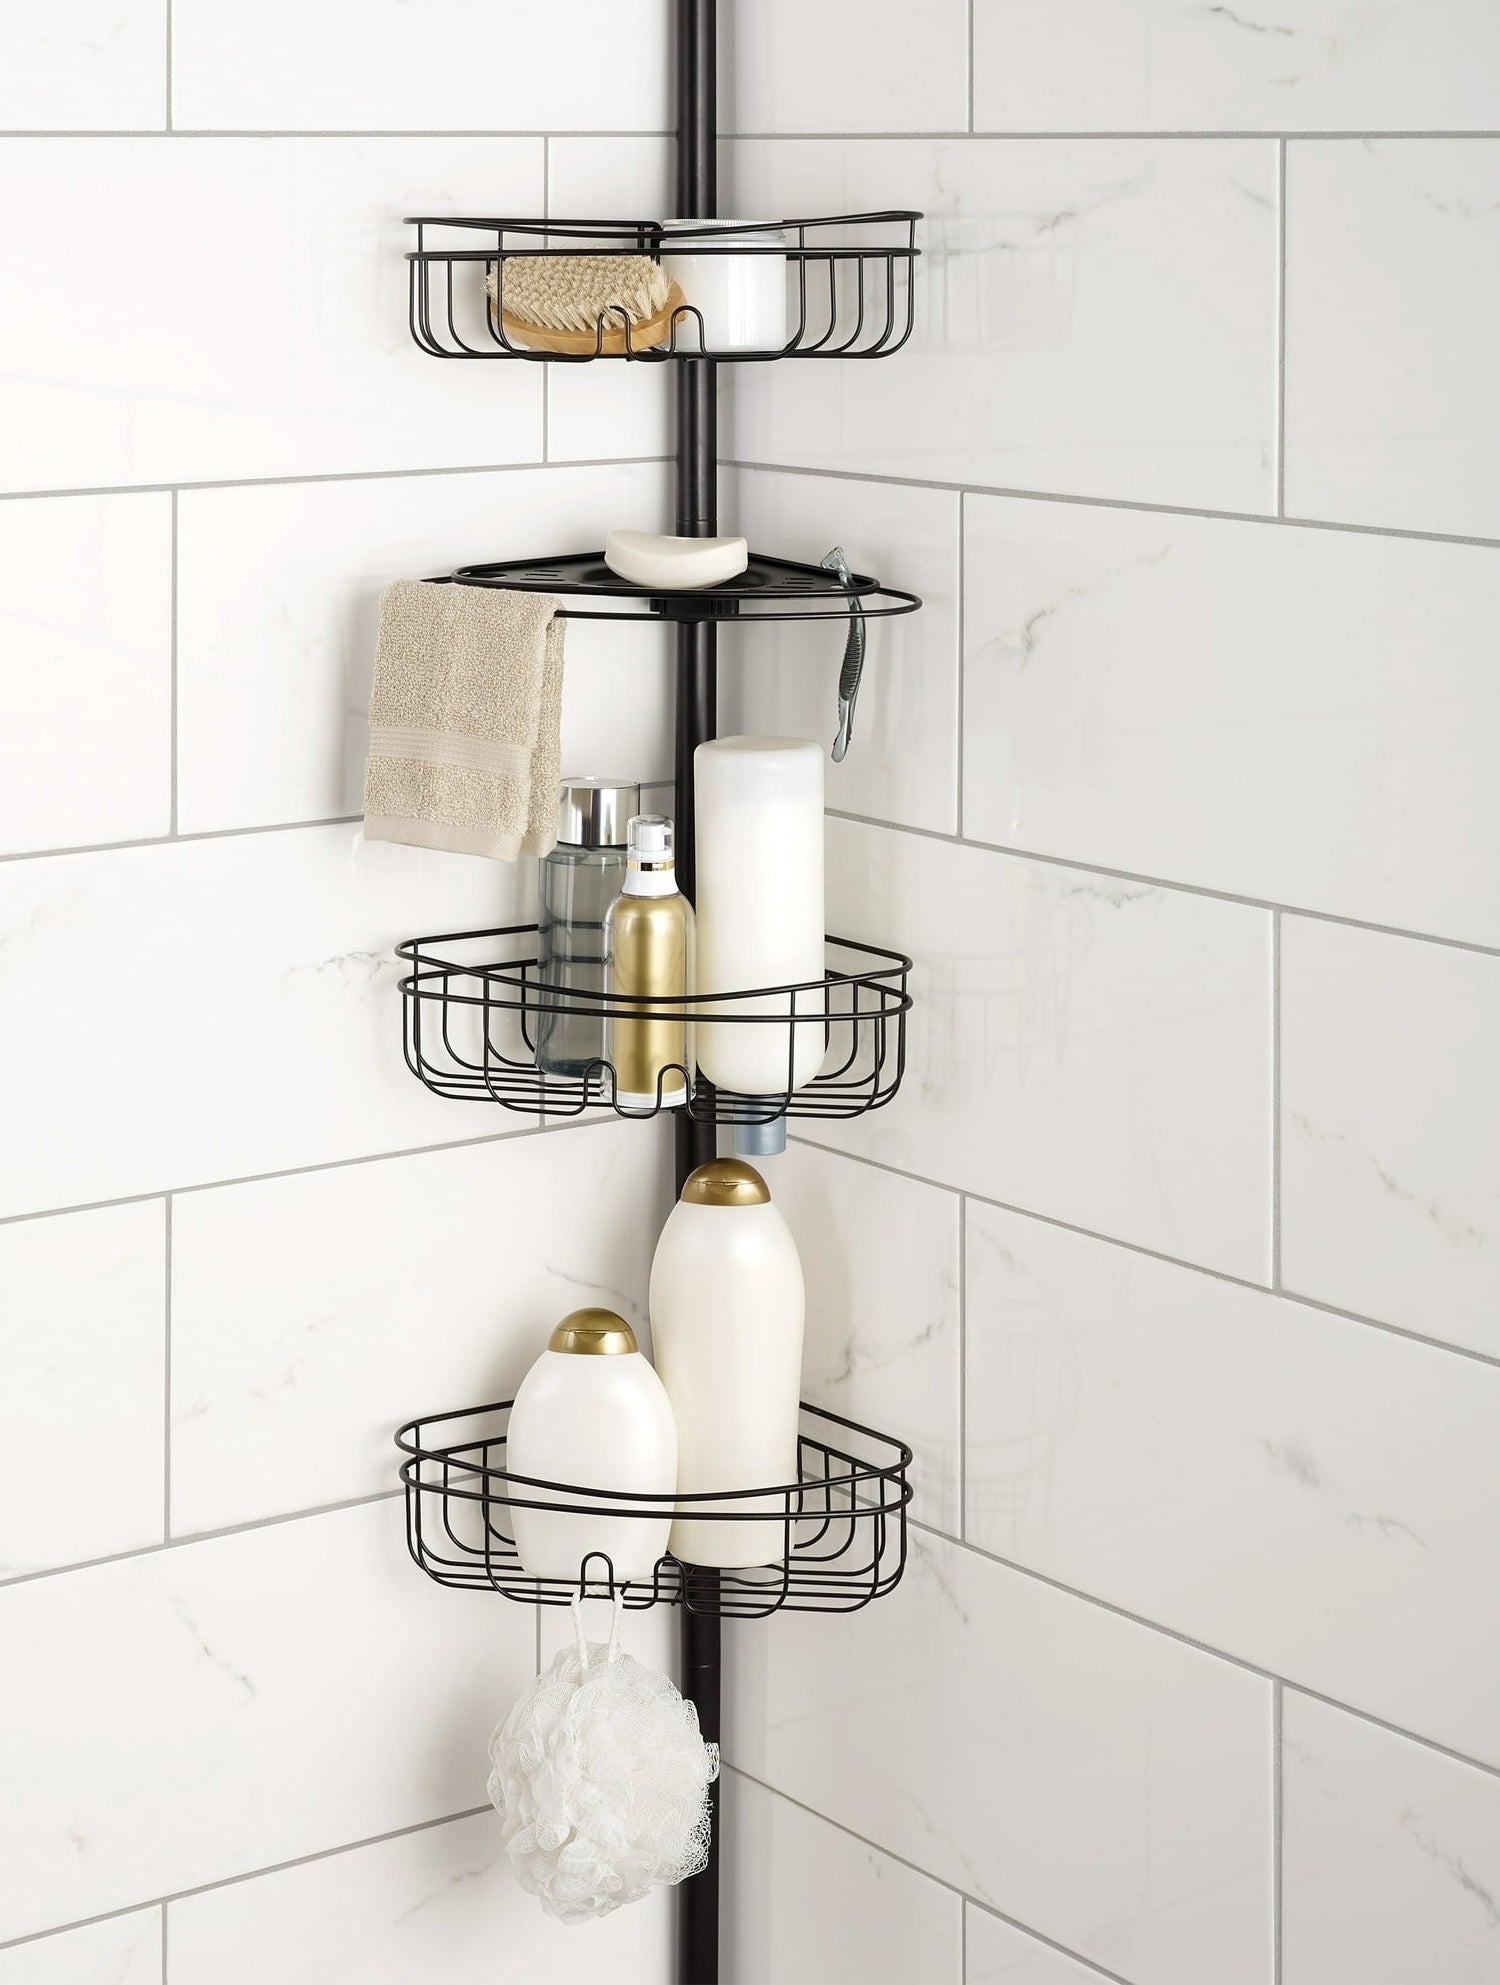 the shower caddy in the corner of a shower with multiple shelves